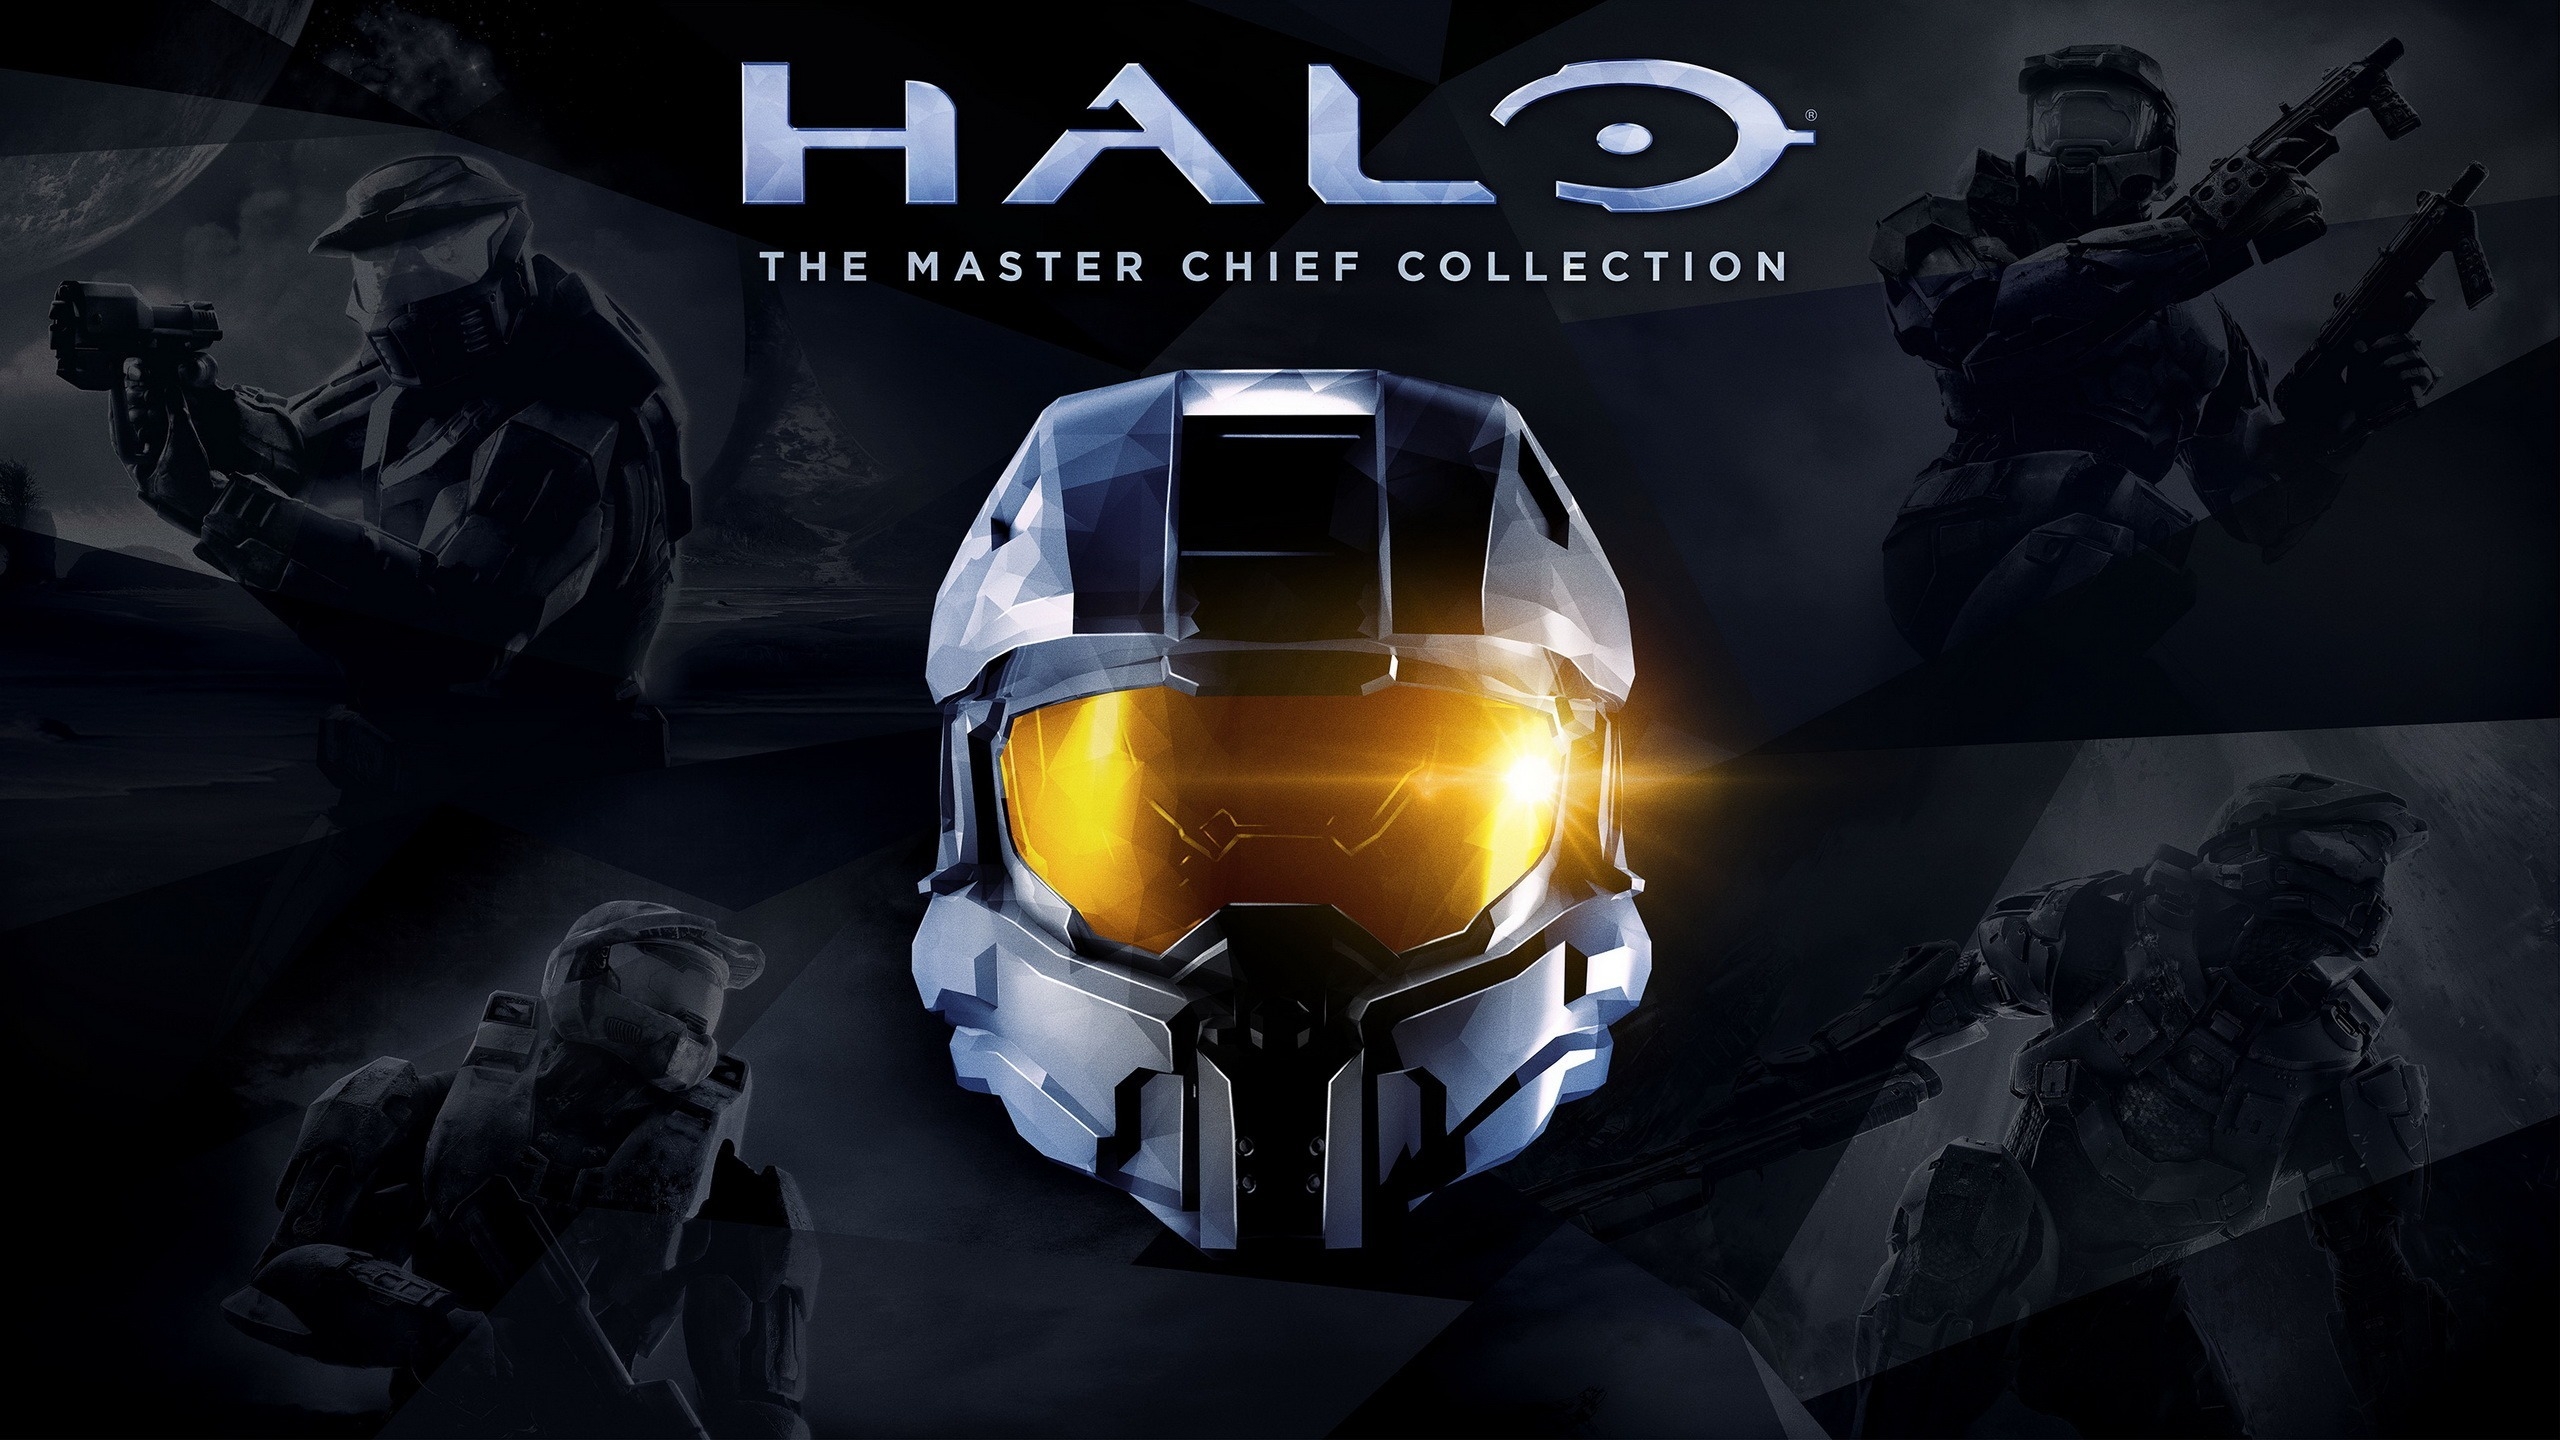 Halo the Master Chief Collection for 2560x1440 HDTV resolution